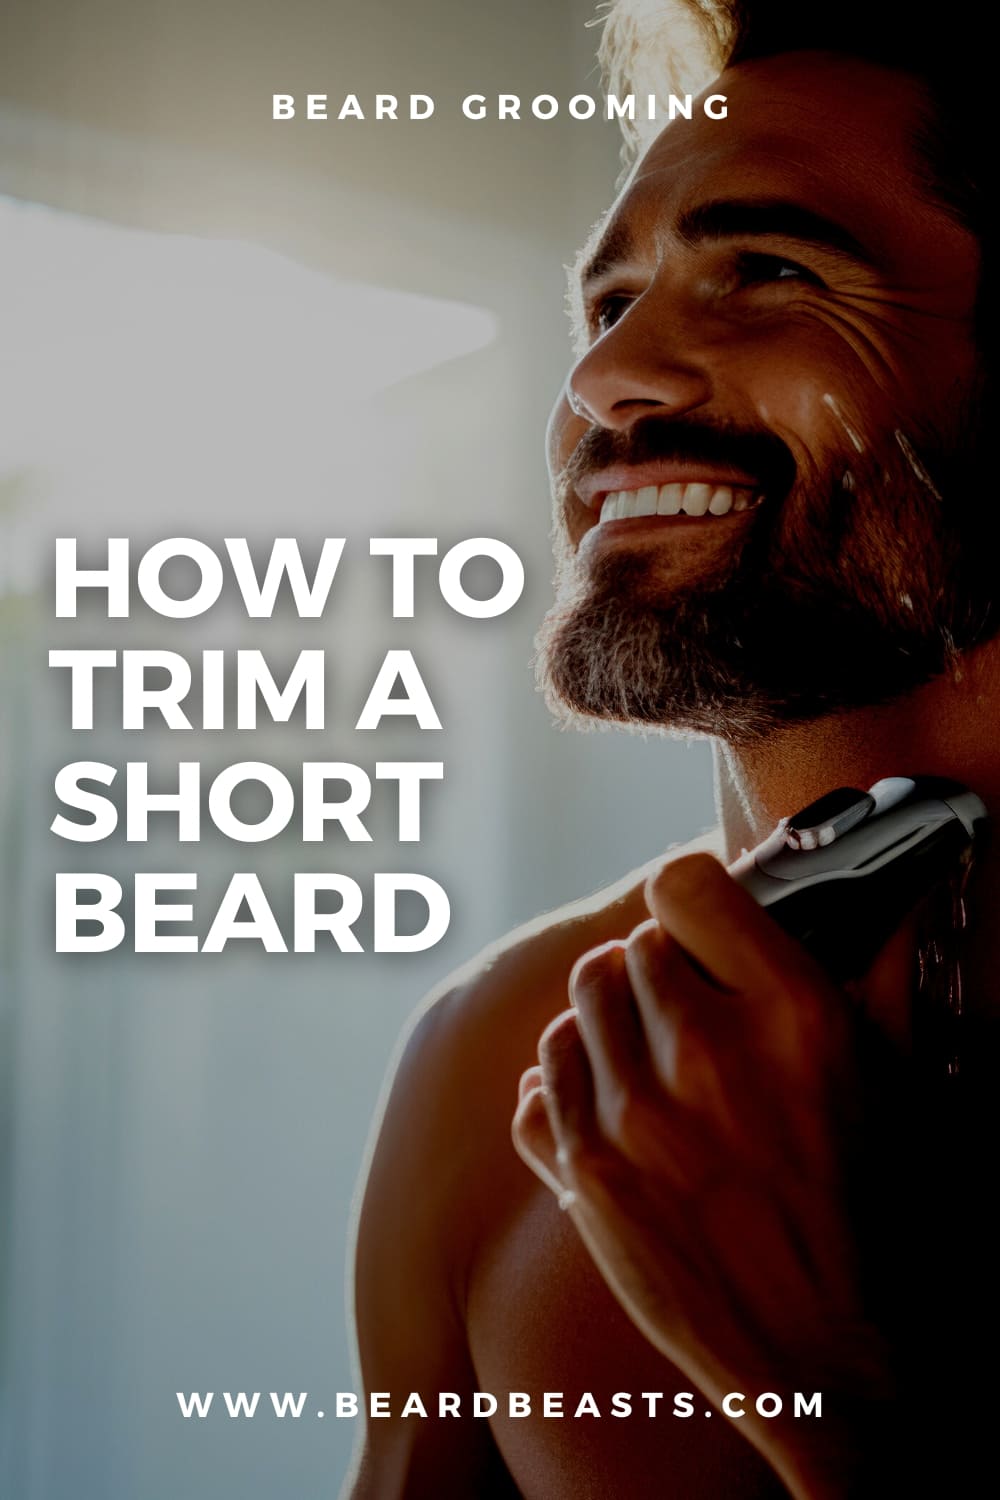 Smiling man with a short beard using an electric trimmer, with text overlay 'Beard Grooming: How To Trim A Short Beard - www.beardbeasts.com' - Perfect for sharing on Pinterest.